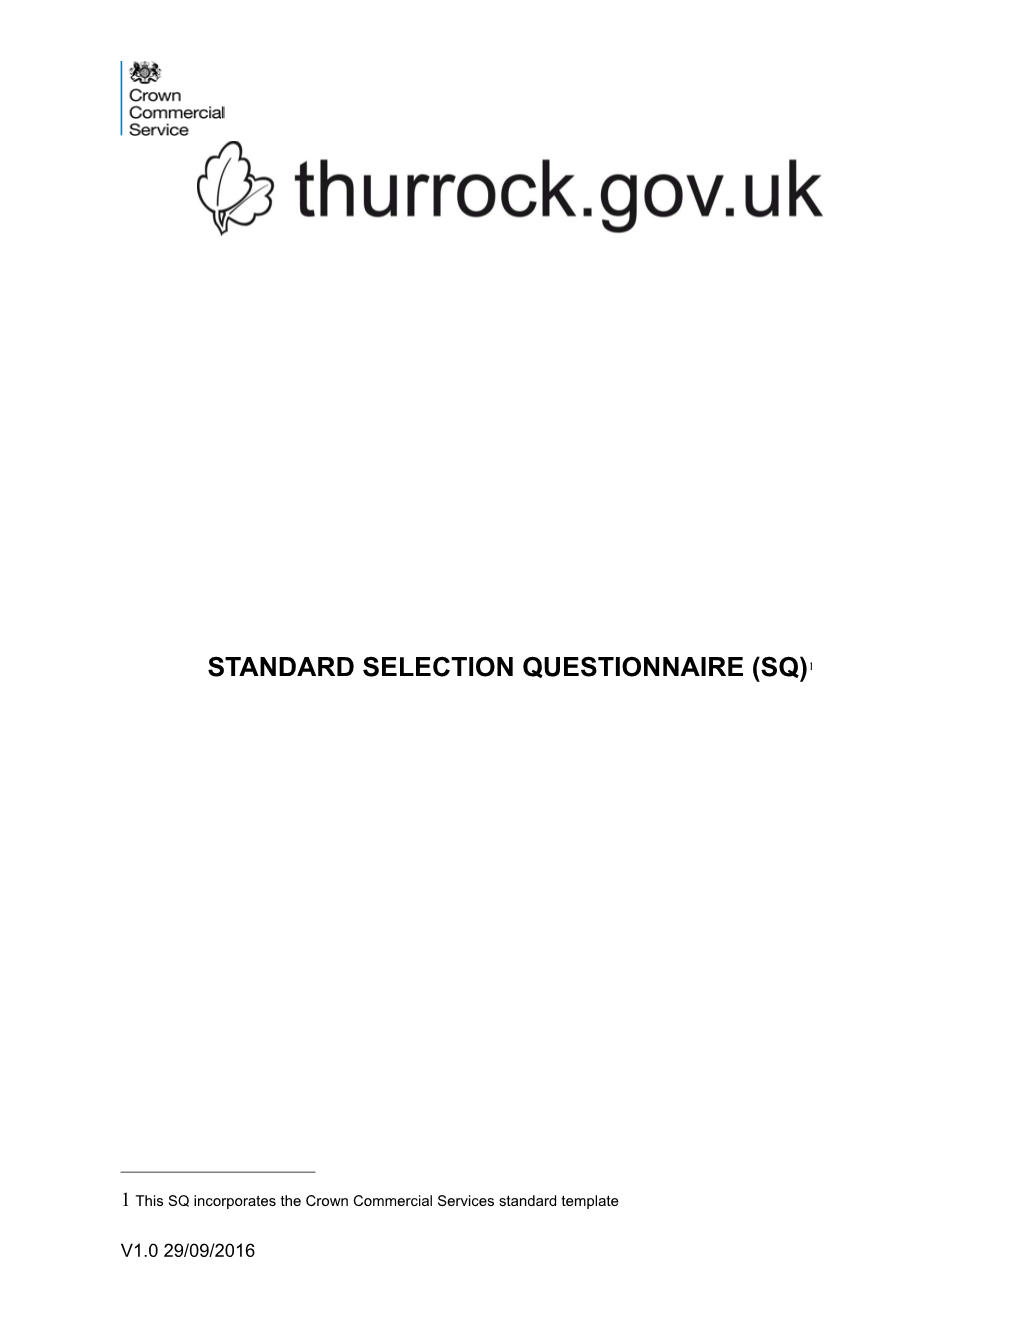 Thurrock Council - Invitation to Tender s1